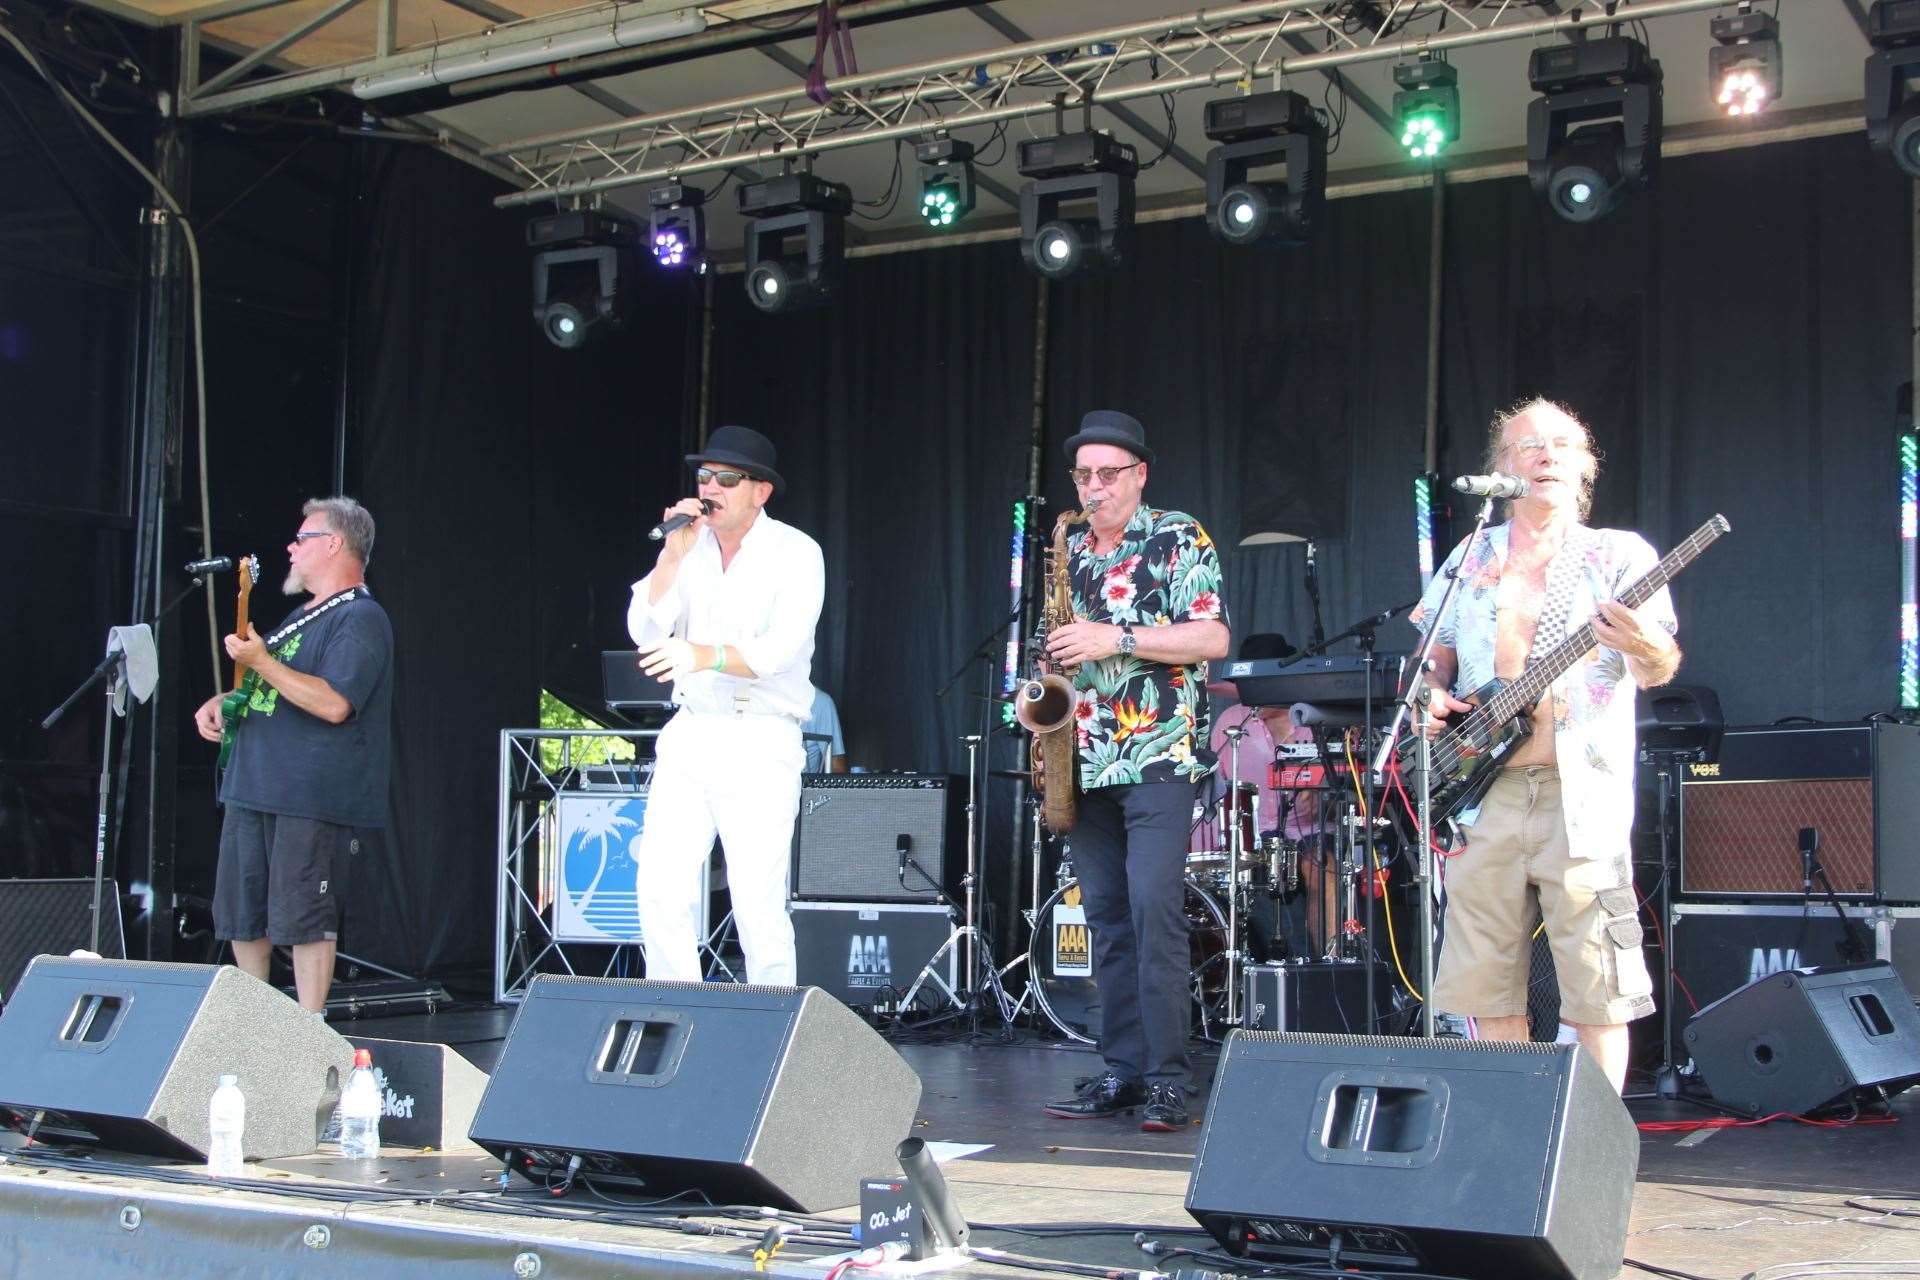 Ska band Skadekat performing at Sittingbourne's Party in The Park on Saturday (13189219)